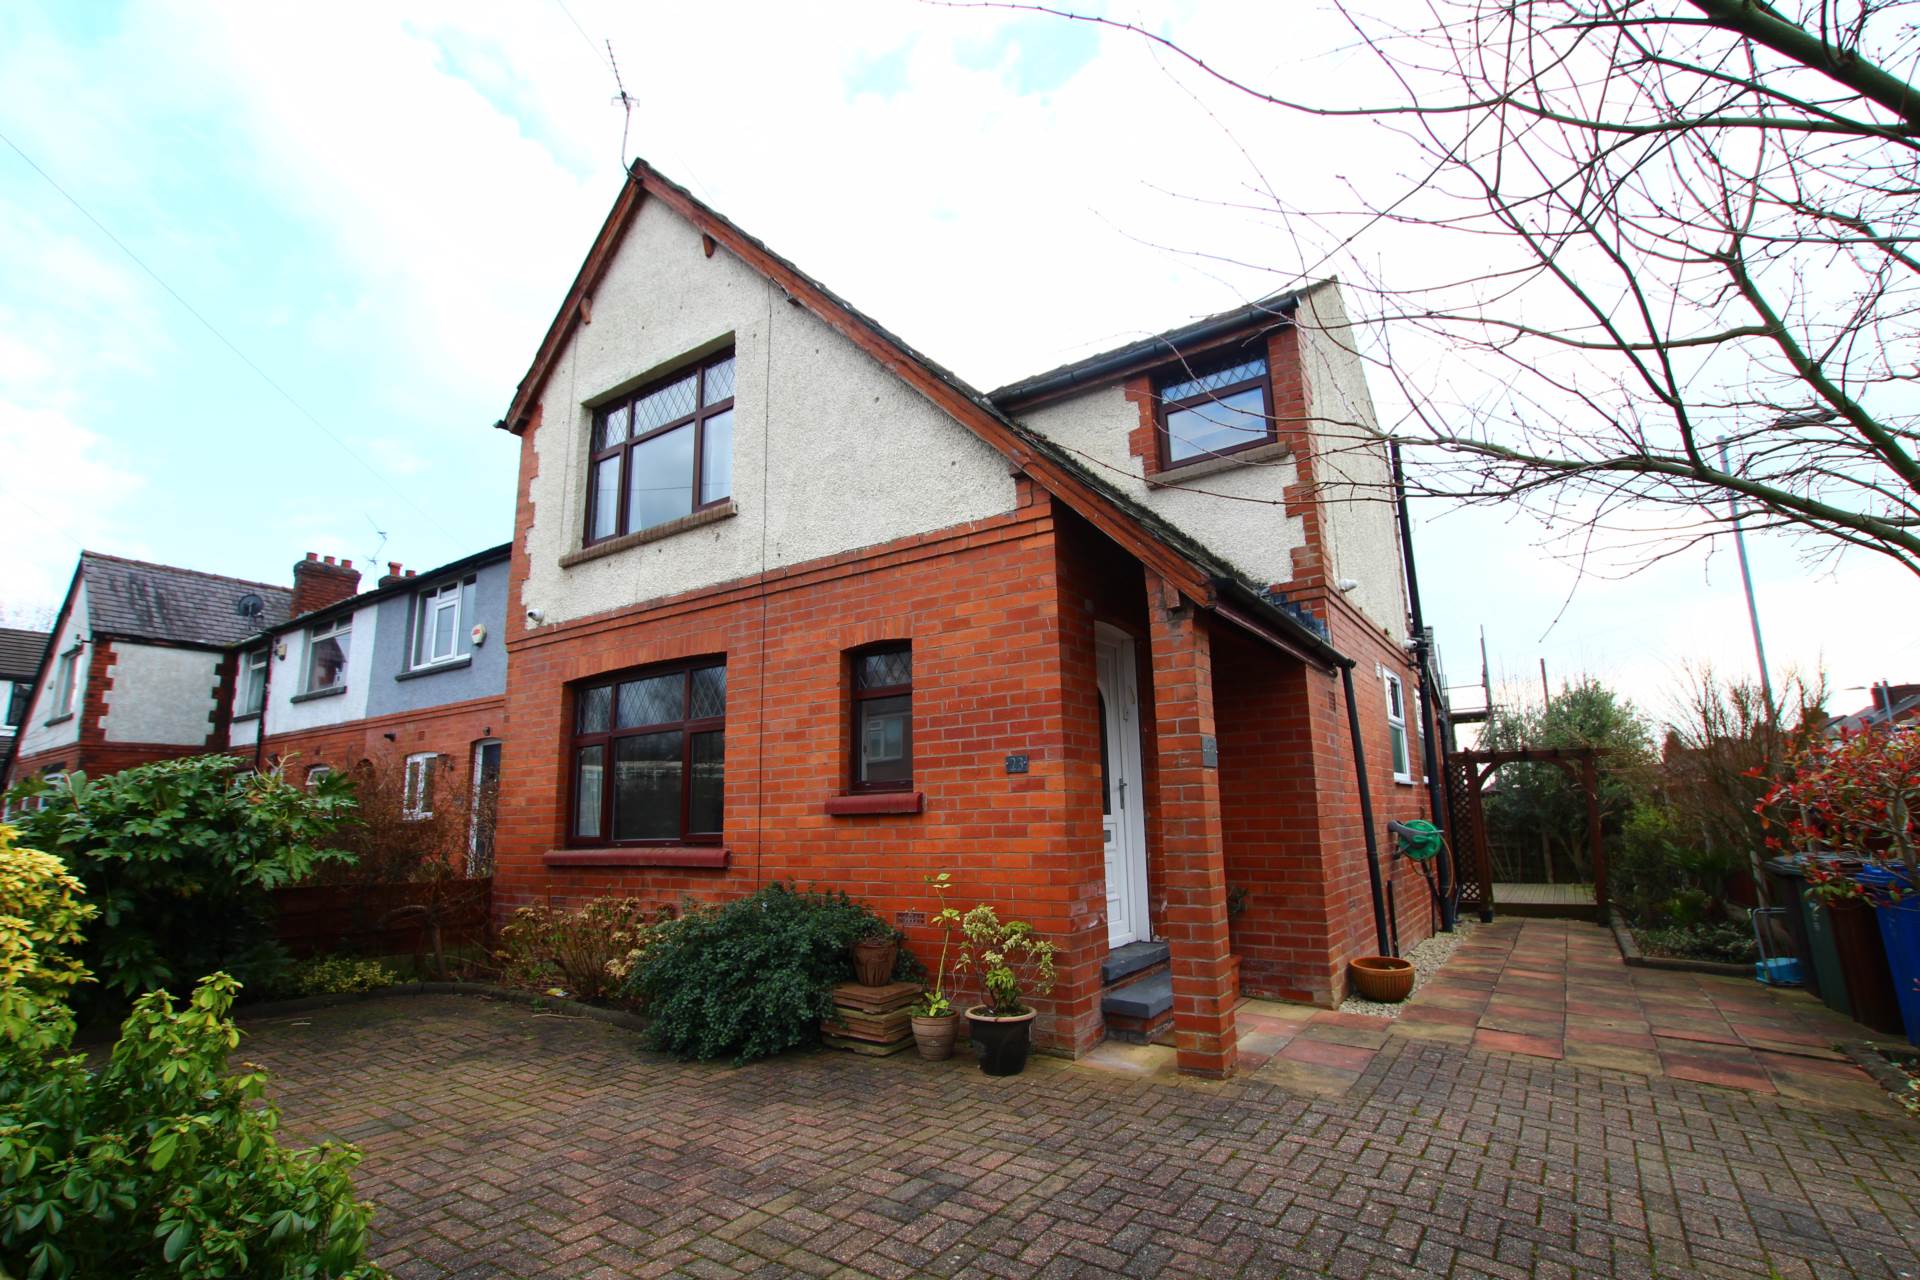 Willow Road, Prestwich, Image 1